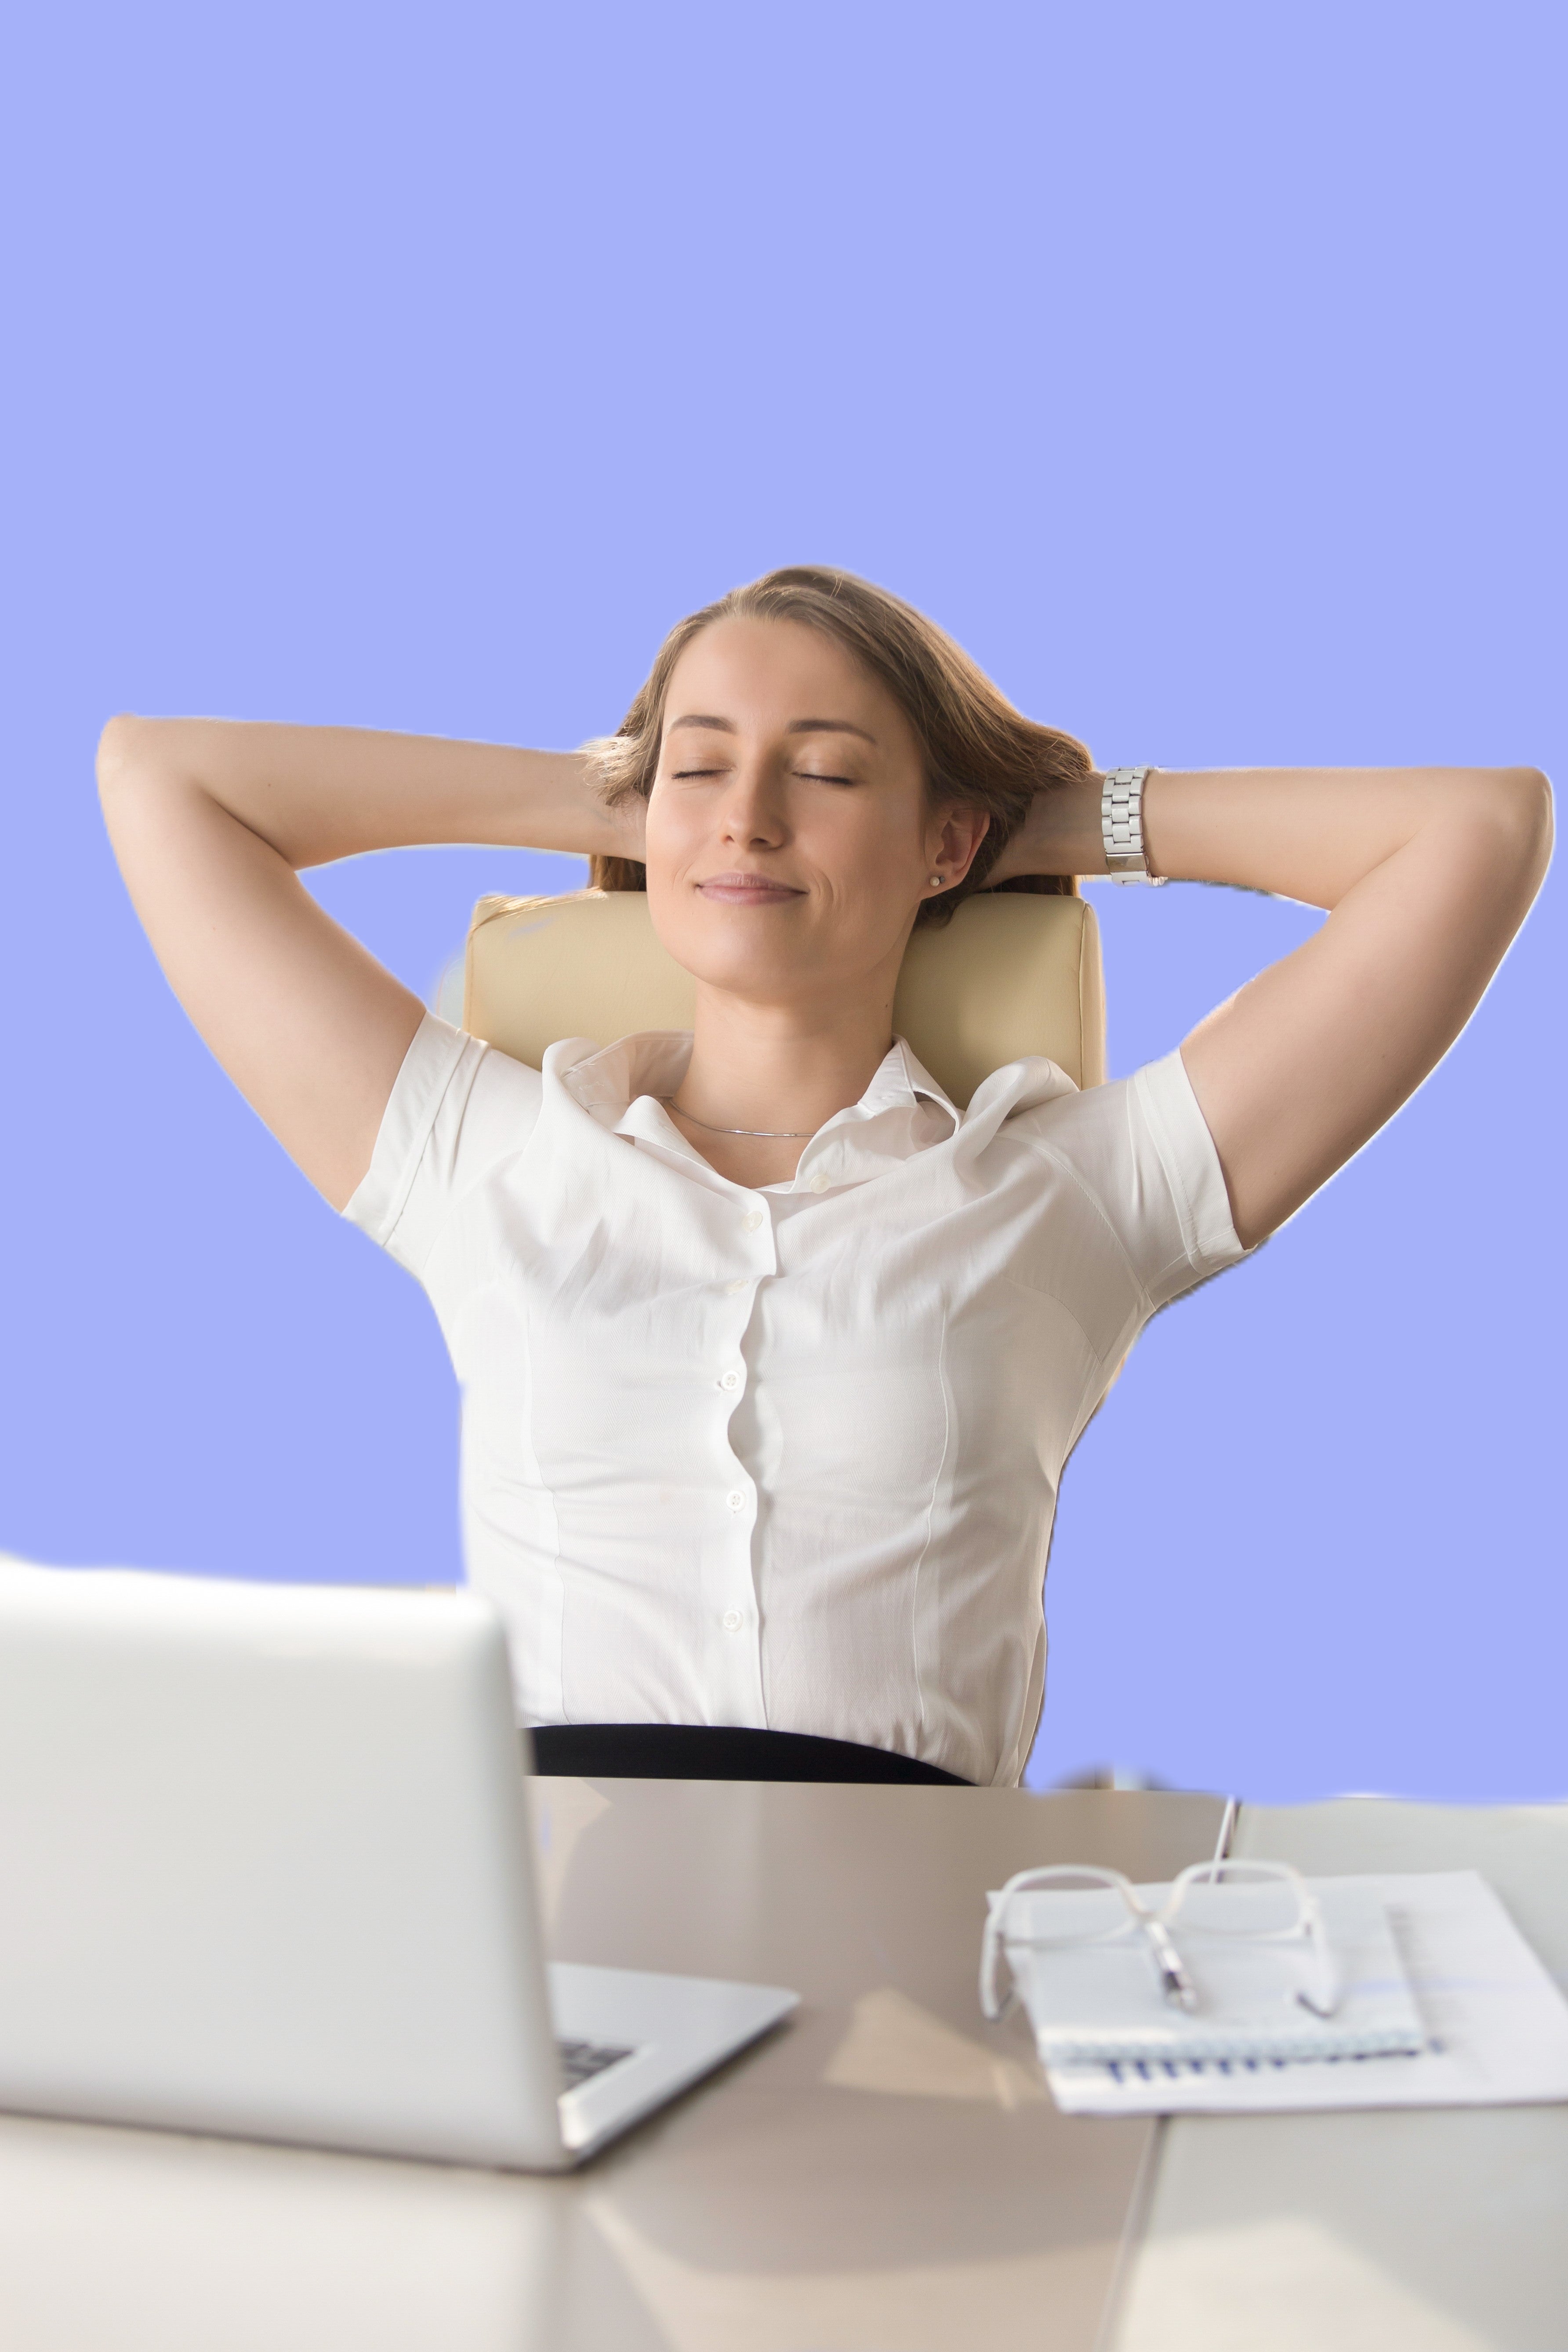 Quick Highly Effective Relaxation Tips During Your Break